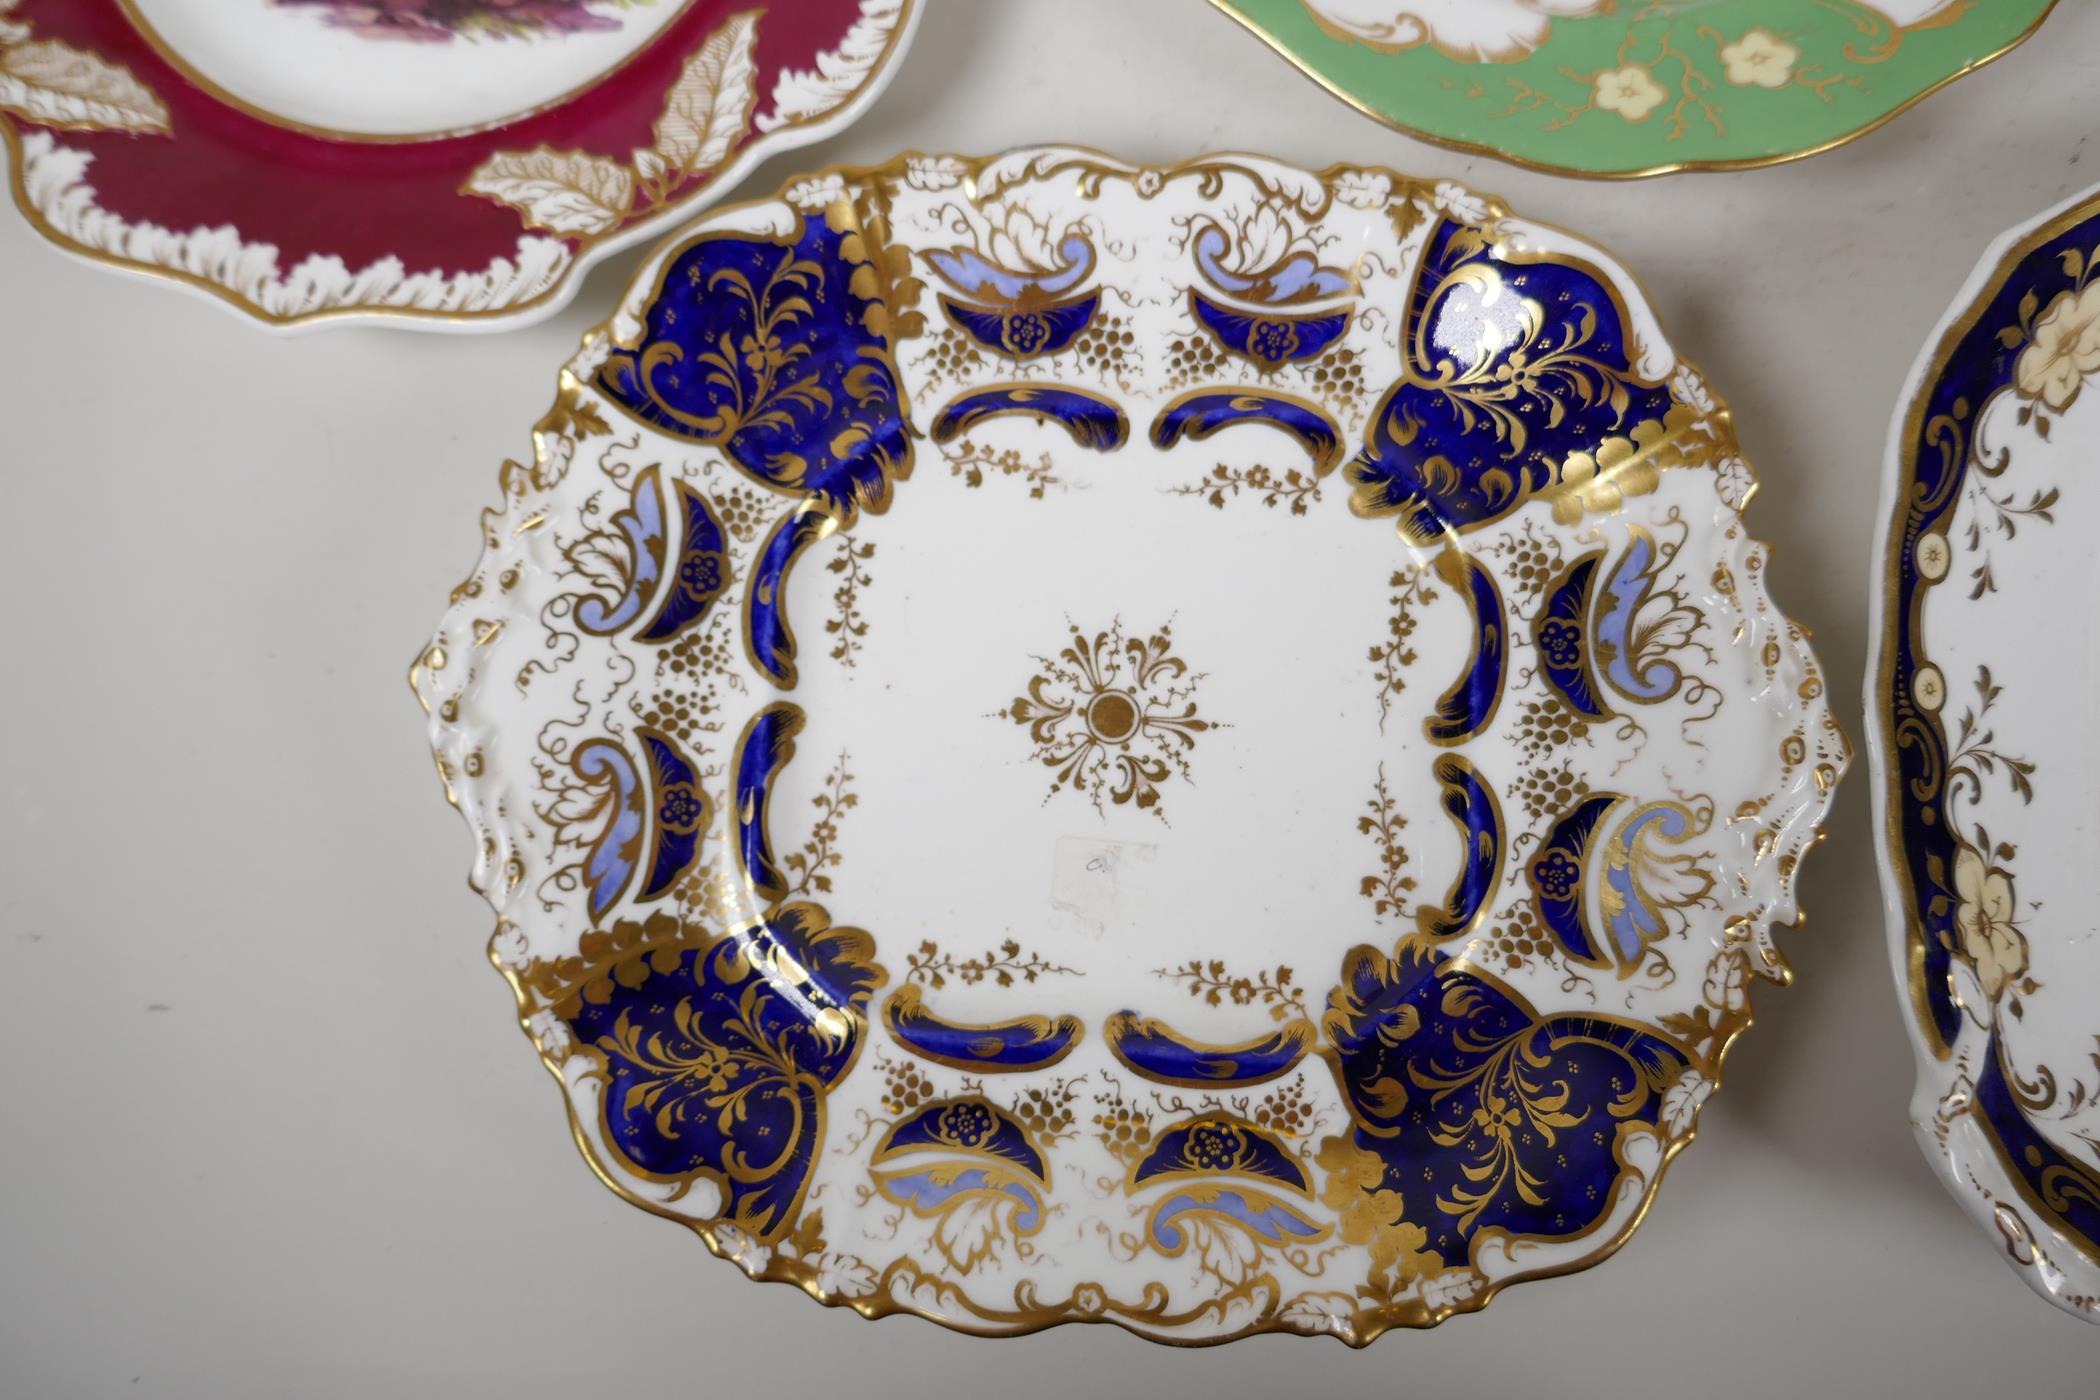 Five decorative C19th English pottery plates with painted decoration, various factories from the - Image 6 of 7